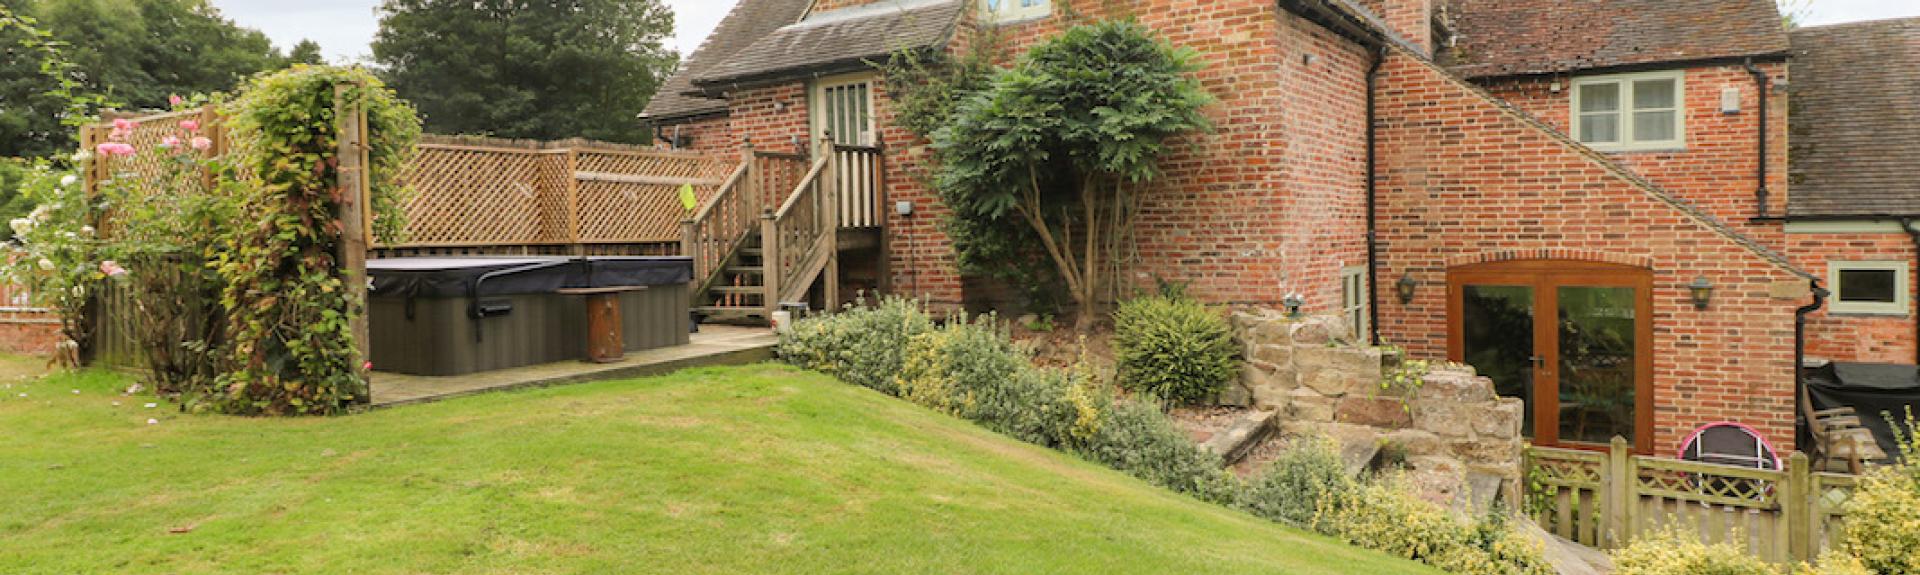 A brick-built, 3-storey holiday cottage with a hot tub and large lawn.